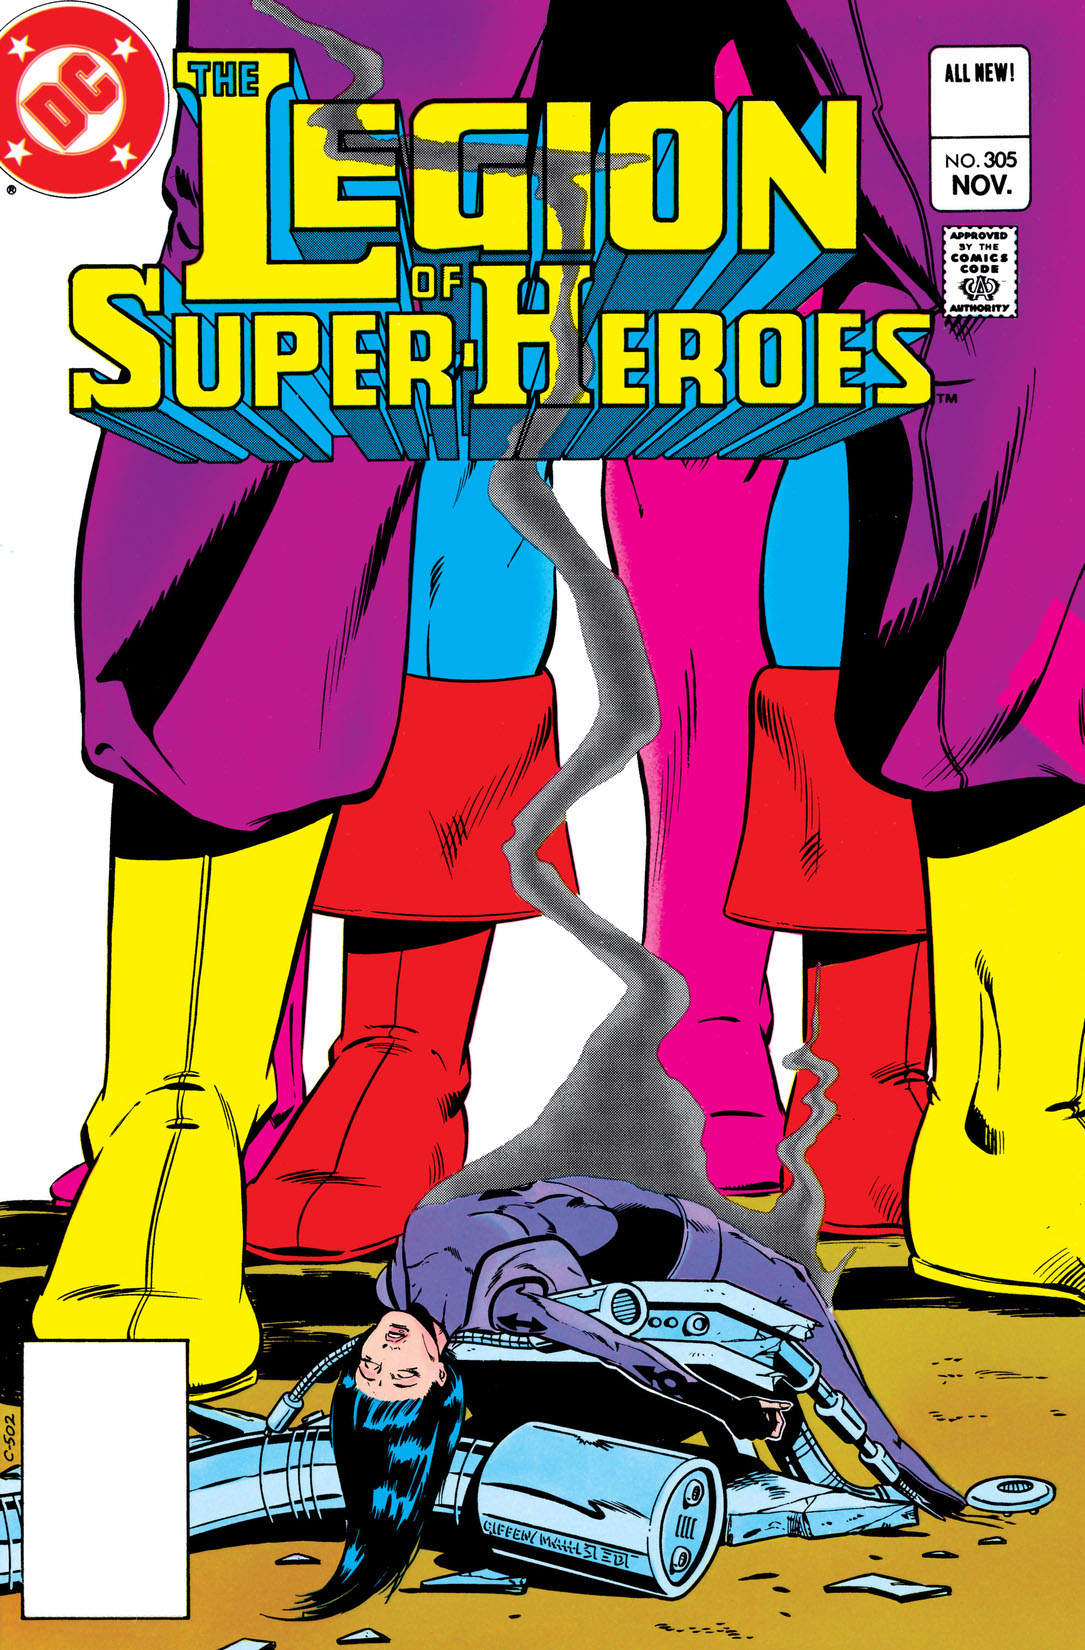 The Legion of Super-Heroes (1980-) #305 preview images